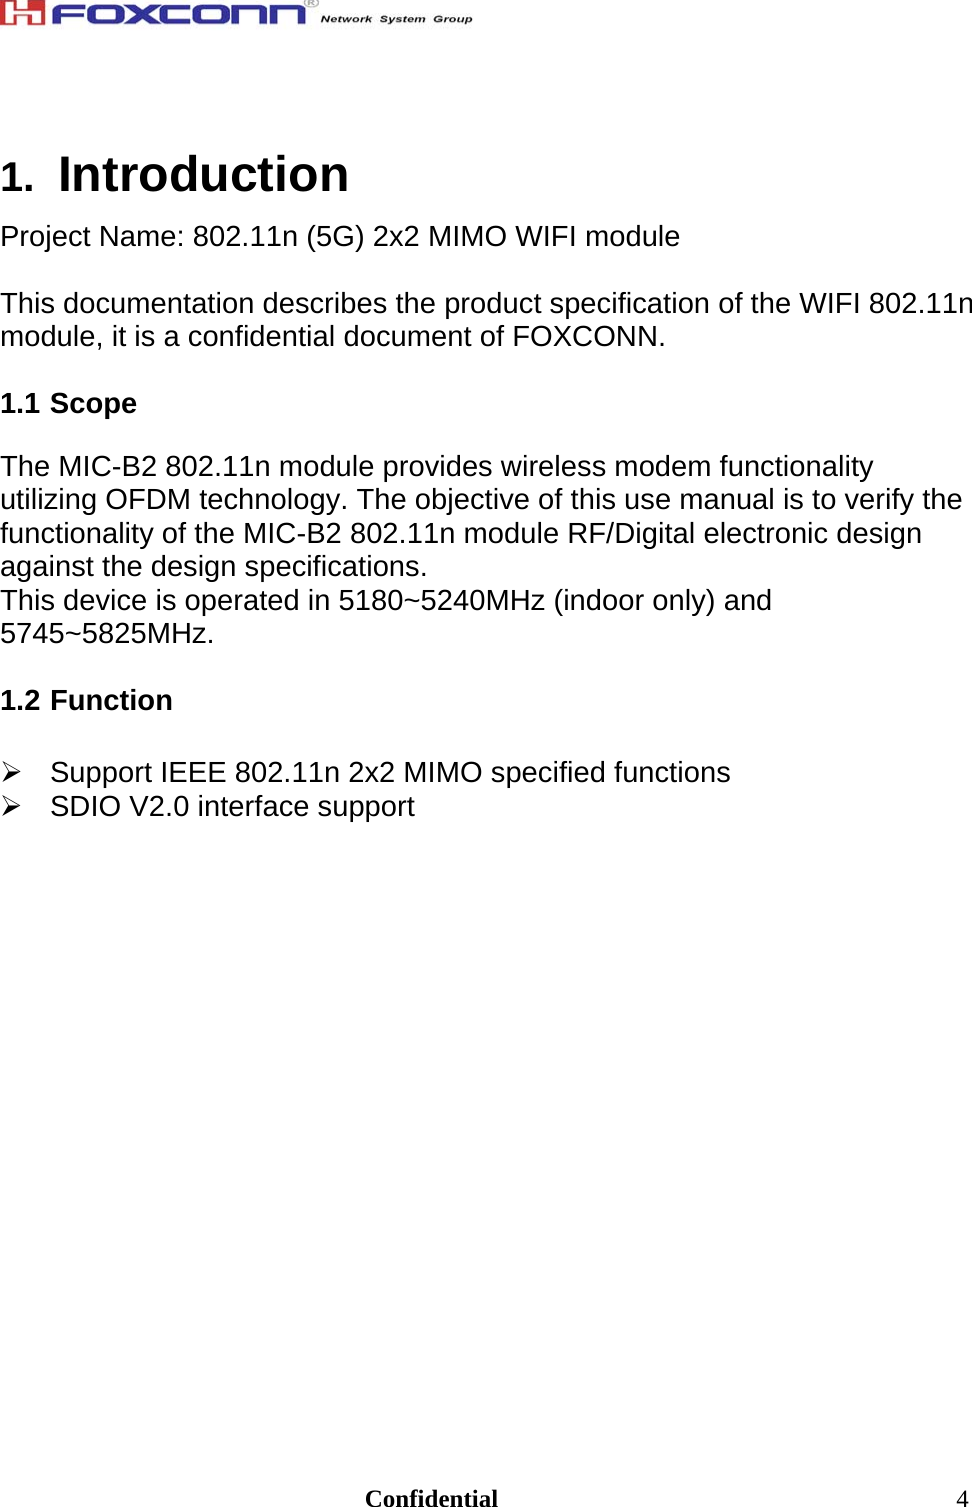                                                                               Confidential  41.  Introduction Project Name: 802.11n (5G) 2x2 MIMO WIFI module  This documentation describes the product specification of the WIFI 802.11n module, it is a confidential document of FOXCONN.  1.1 Scope  The MIC-B2 802.11n module provides wireless modem functionality utilizing OFDM technology. The objective of this use manual is to verify the functionality of the MIC-B2 802.11n module RF/Digital electronic design against the design specifications.  This device is operated in 5180~5240MHz (indoor only) and 5745~5825MHz.  1.2 Function    Support IEEE 802.11n 2x2 MIMO specified functions   SDIO V2.0 interface support  